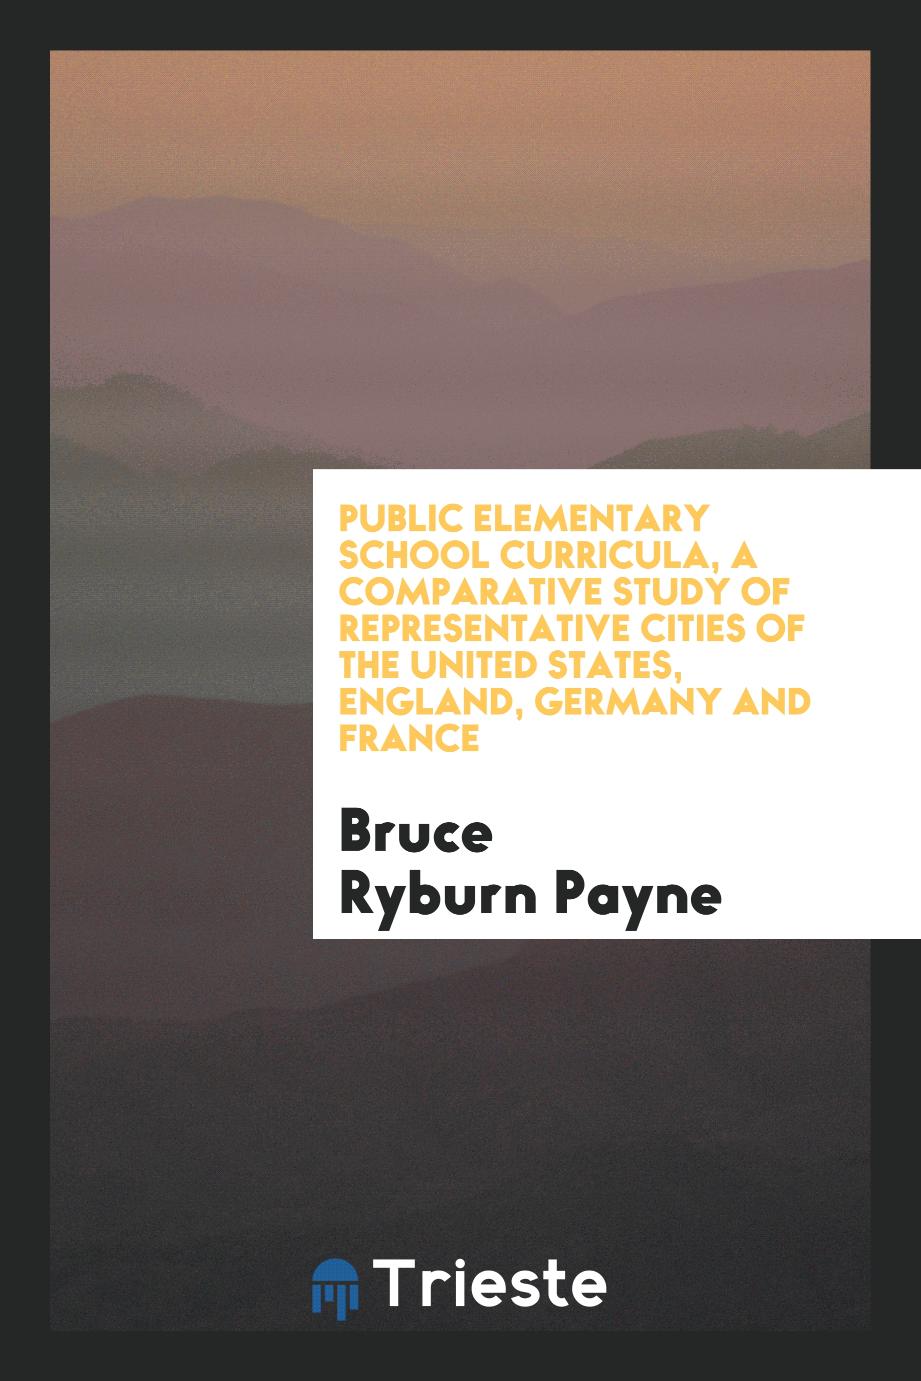 Public elementary school curricula, a comparative study of representative Cities of the United States, England, Germany and France